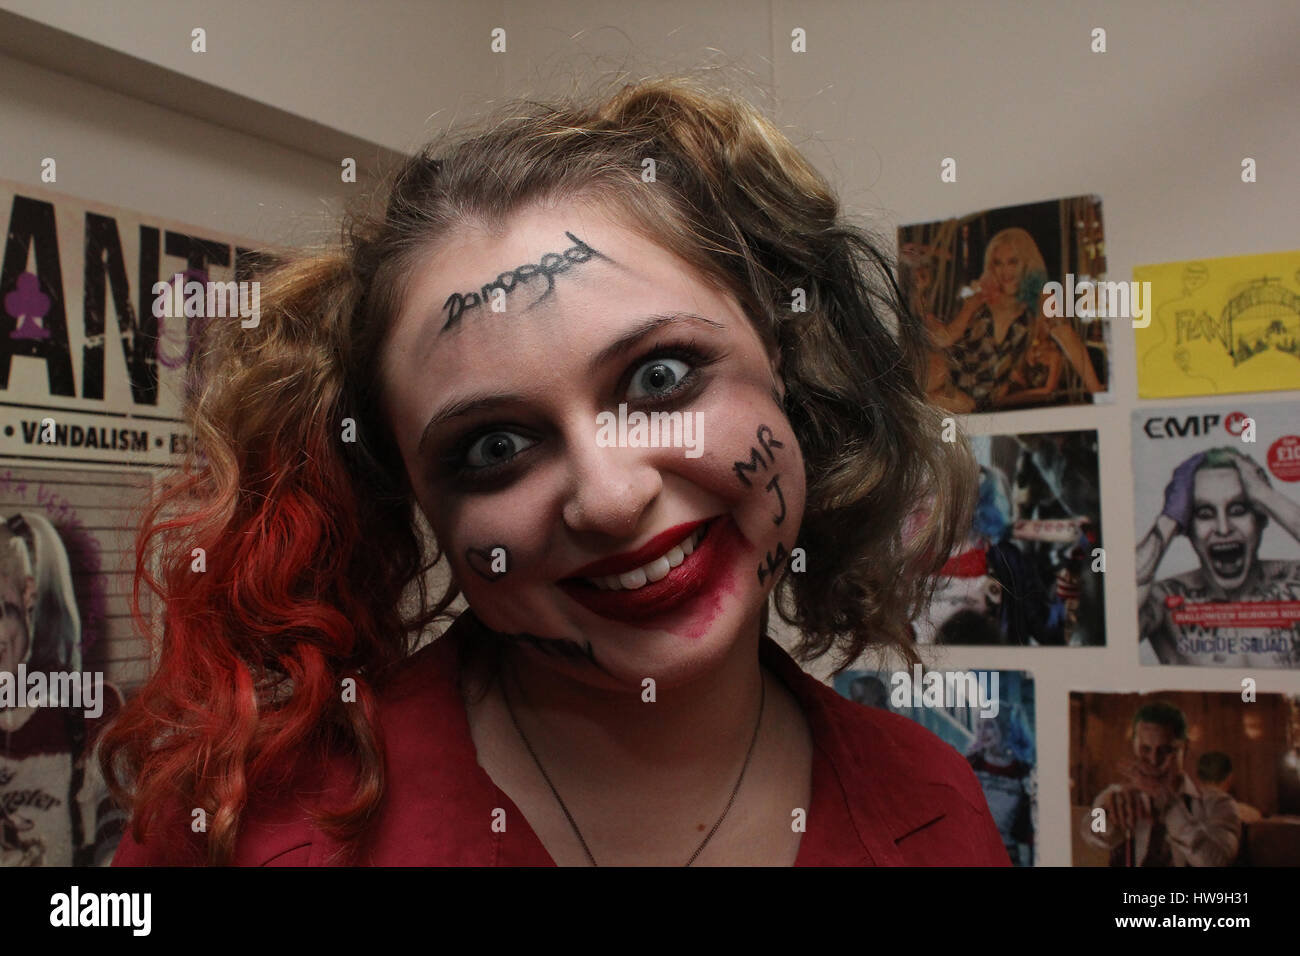 4/12/16, Pellet Street, Cardiff, Wales. In flat flat 1502 Francesca Wood age 20, cosplaying as the comic book charactor “Harley Quinn”. Stock Photo